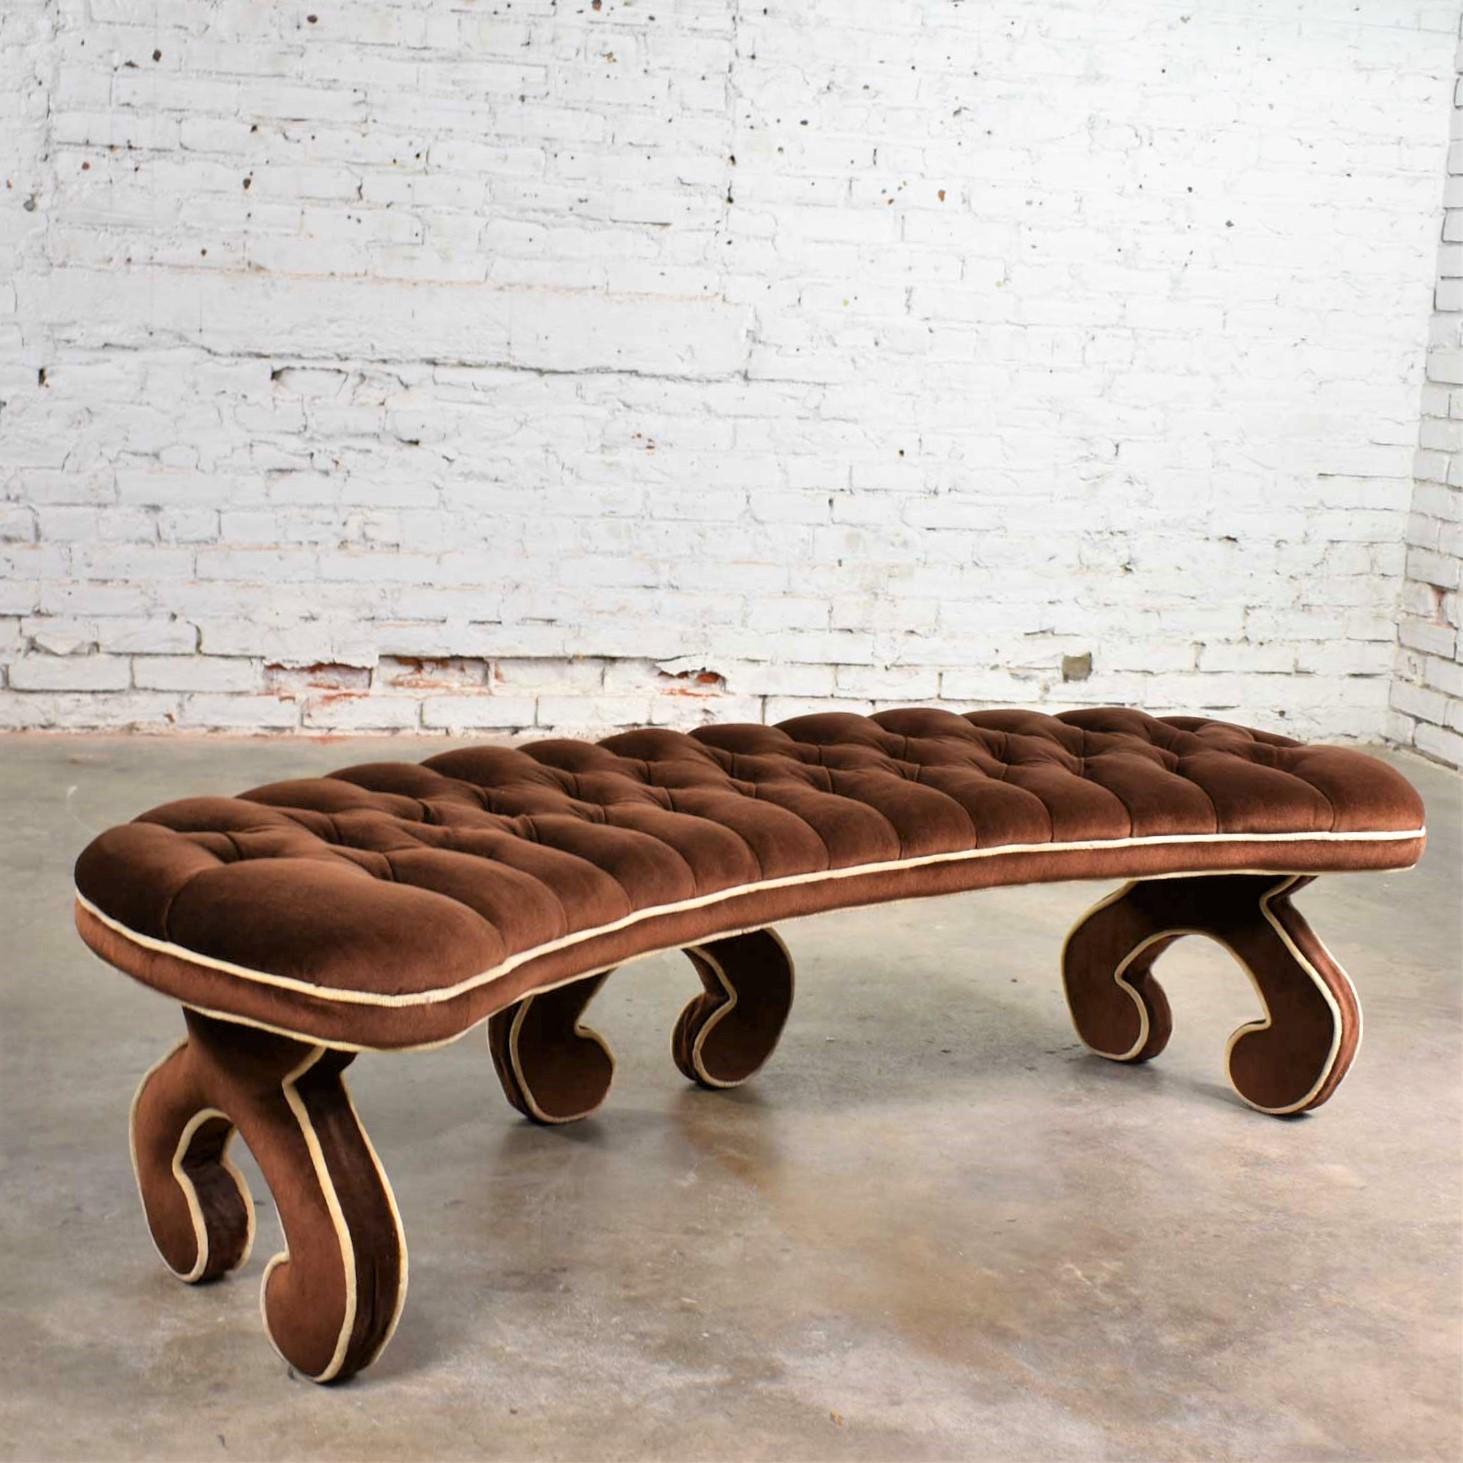 20th Century Hollywood Regency Curved Bench Fully Upholstered & Tufted in Cocoa Brown Velvet